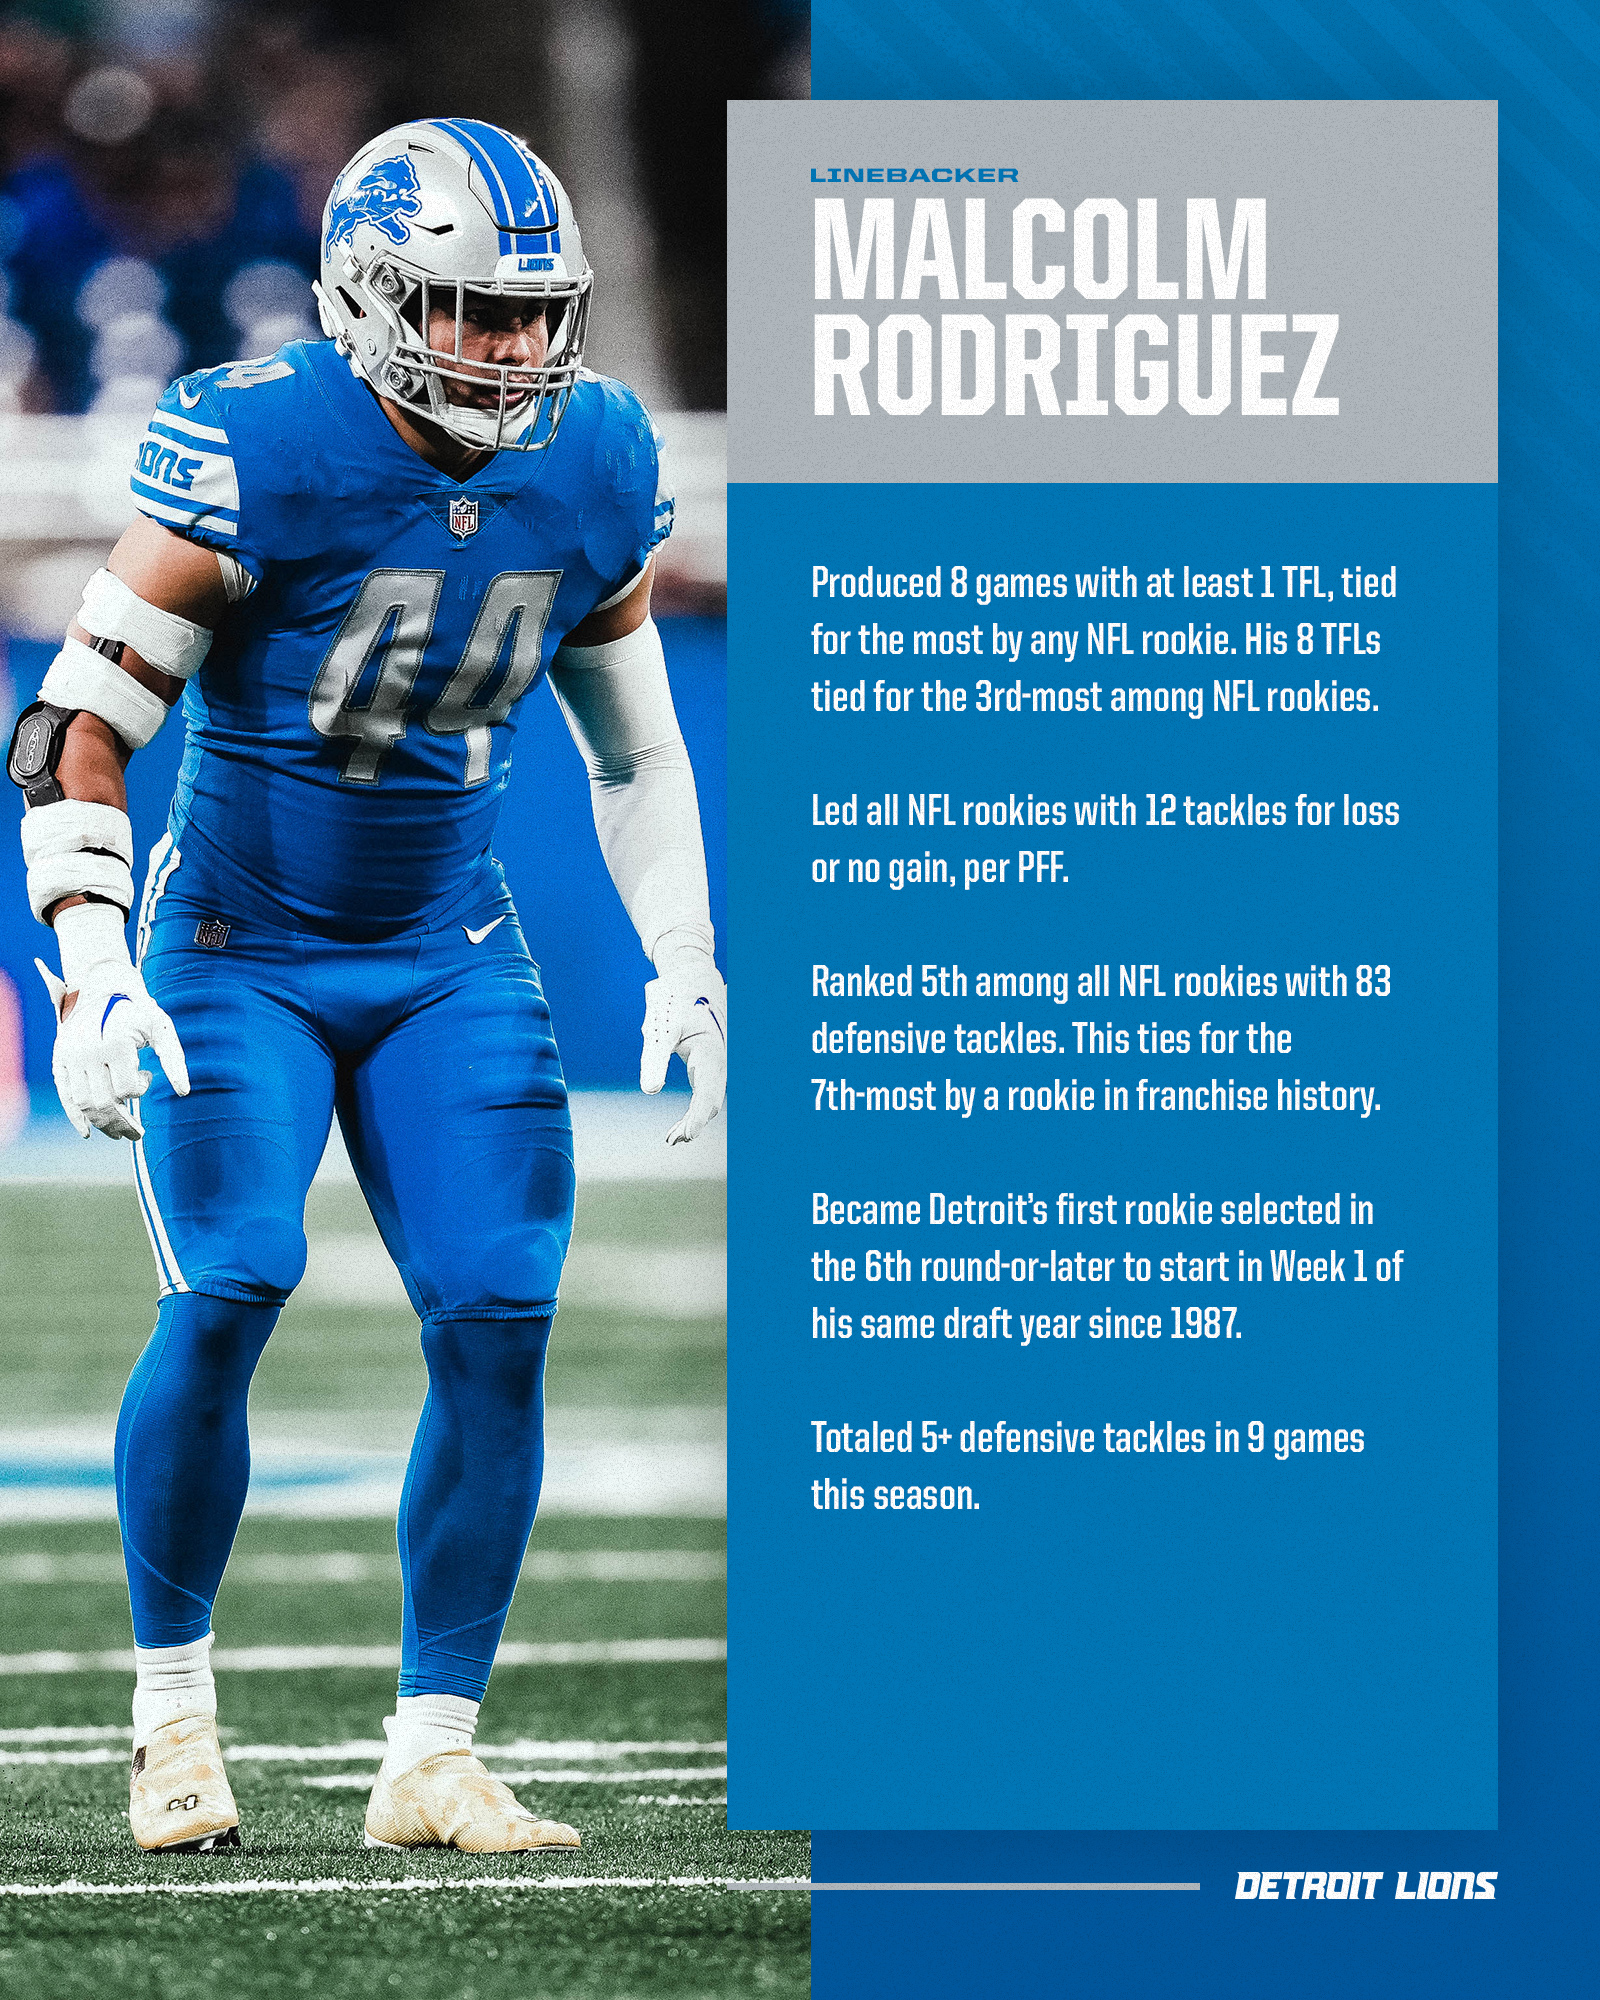 Detroit Lions PR on Twitter: '.@Lions LB @malcolmlrod finished the 2022  season with 12 tackles for loss or no gain, the most by any @NFL rookie  (per @PFF). He logged at least